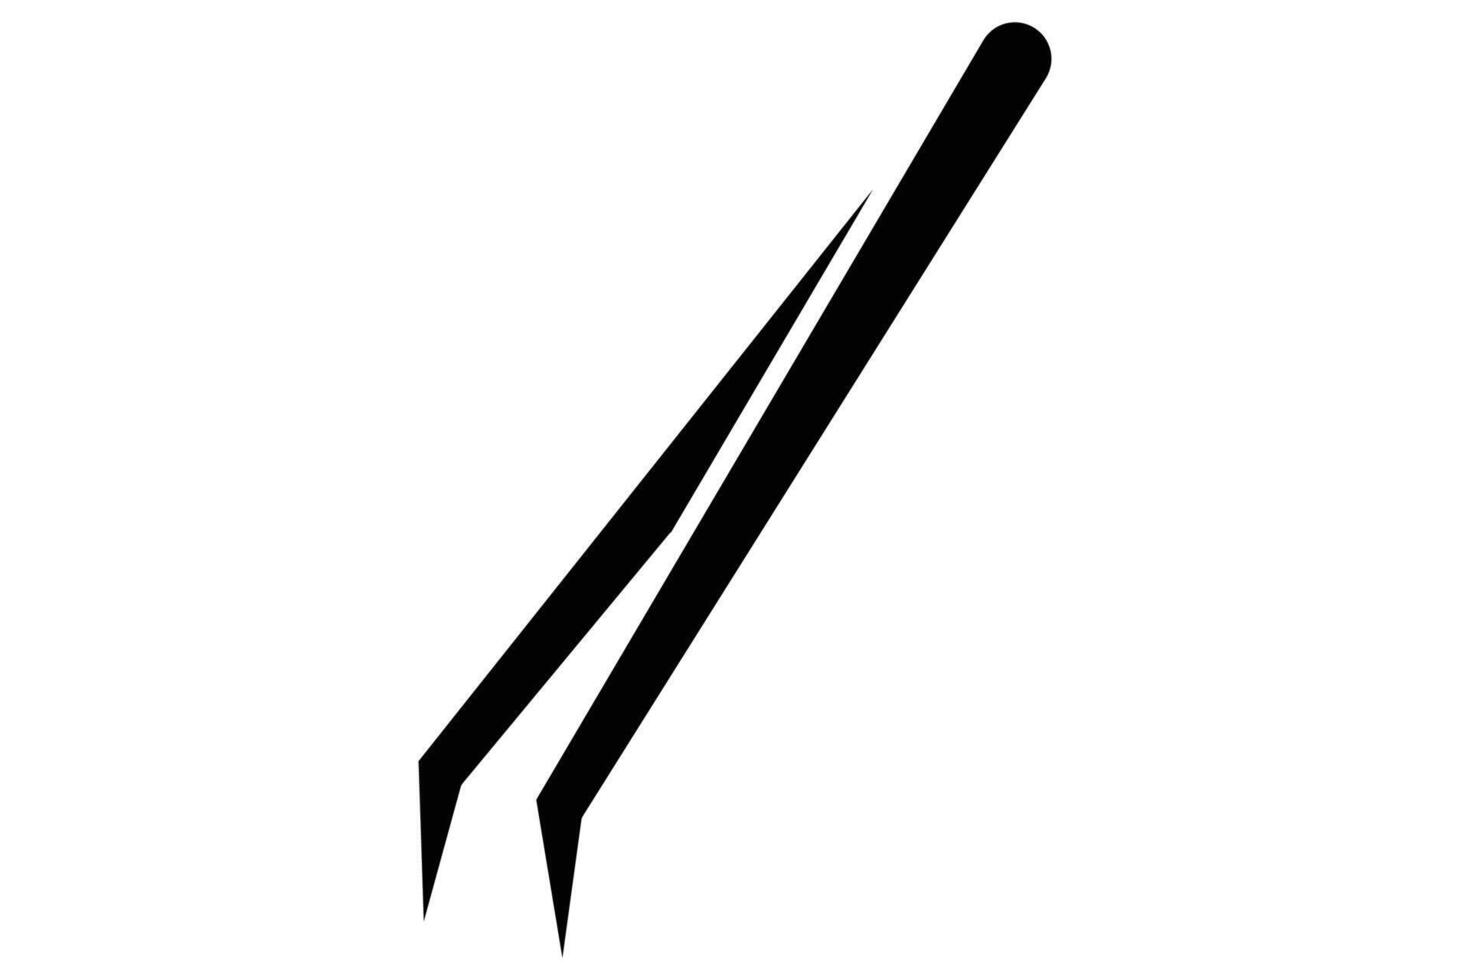 Tweezers icon. icon related eyebrow grooming and precision. solid icon style. element illustration vector